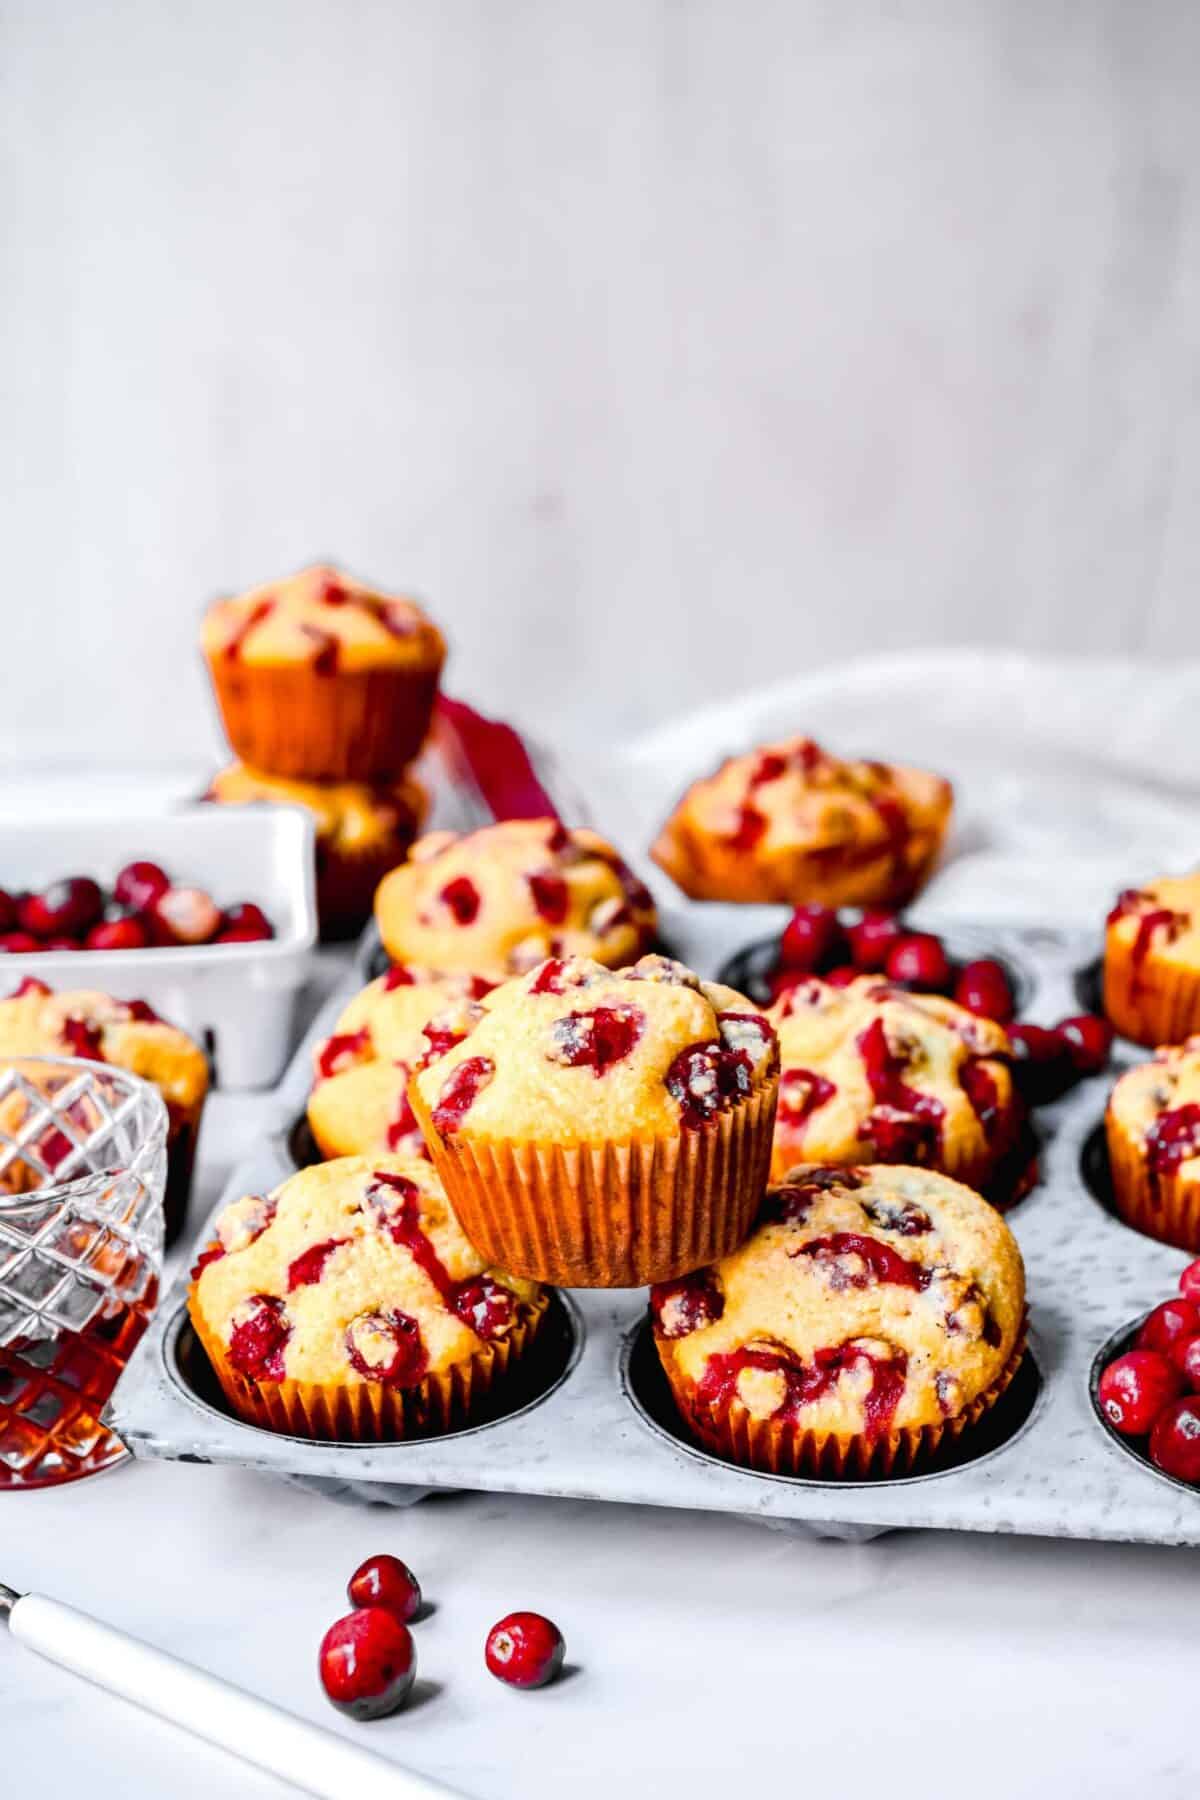 Cranberry cornbread muffins in a muffin tin, with a muffin resting on top of two of them, with muffins and cranberries in the background